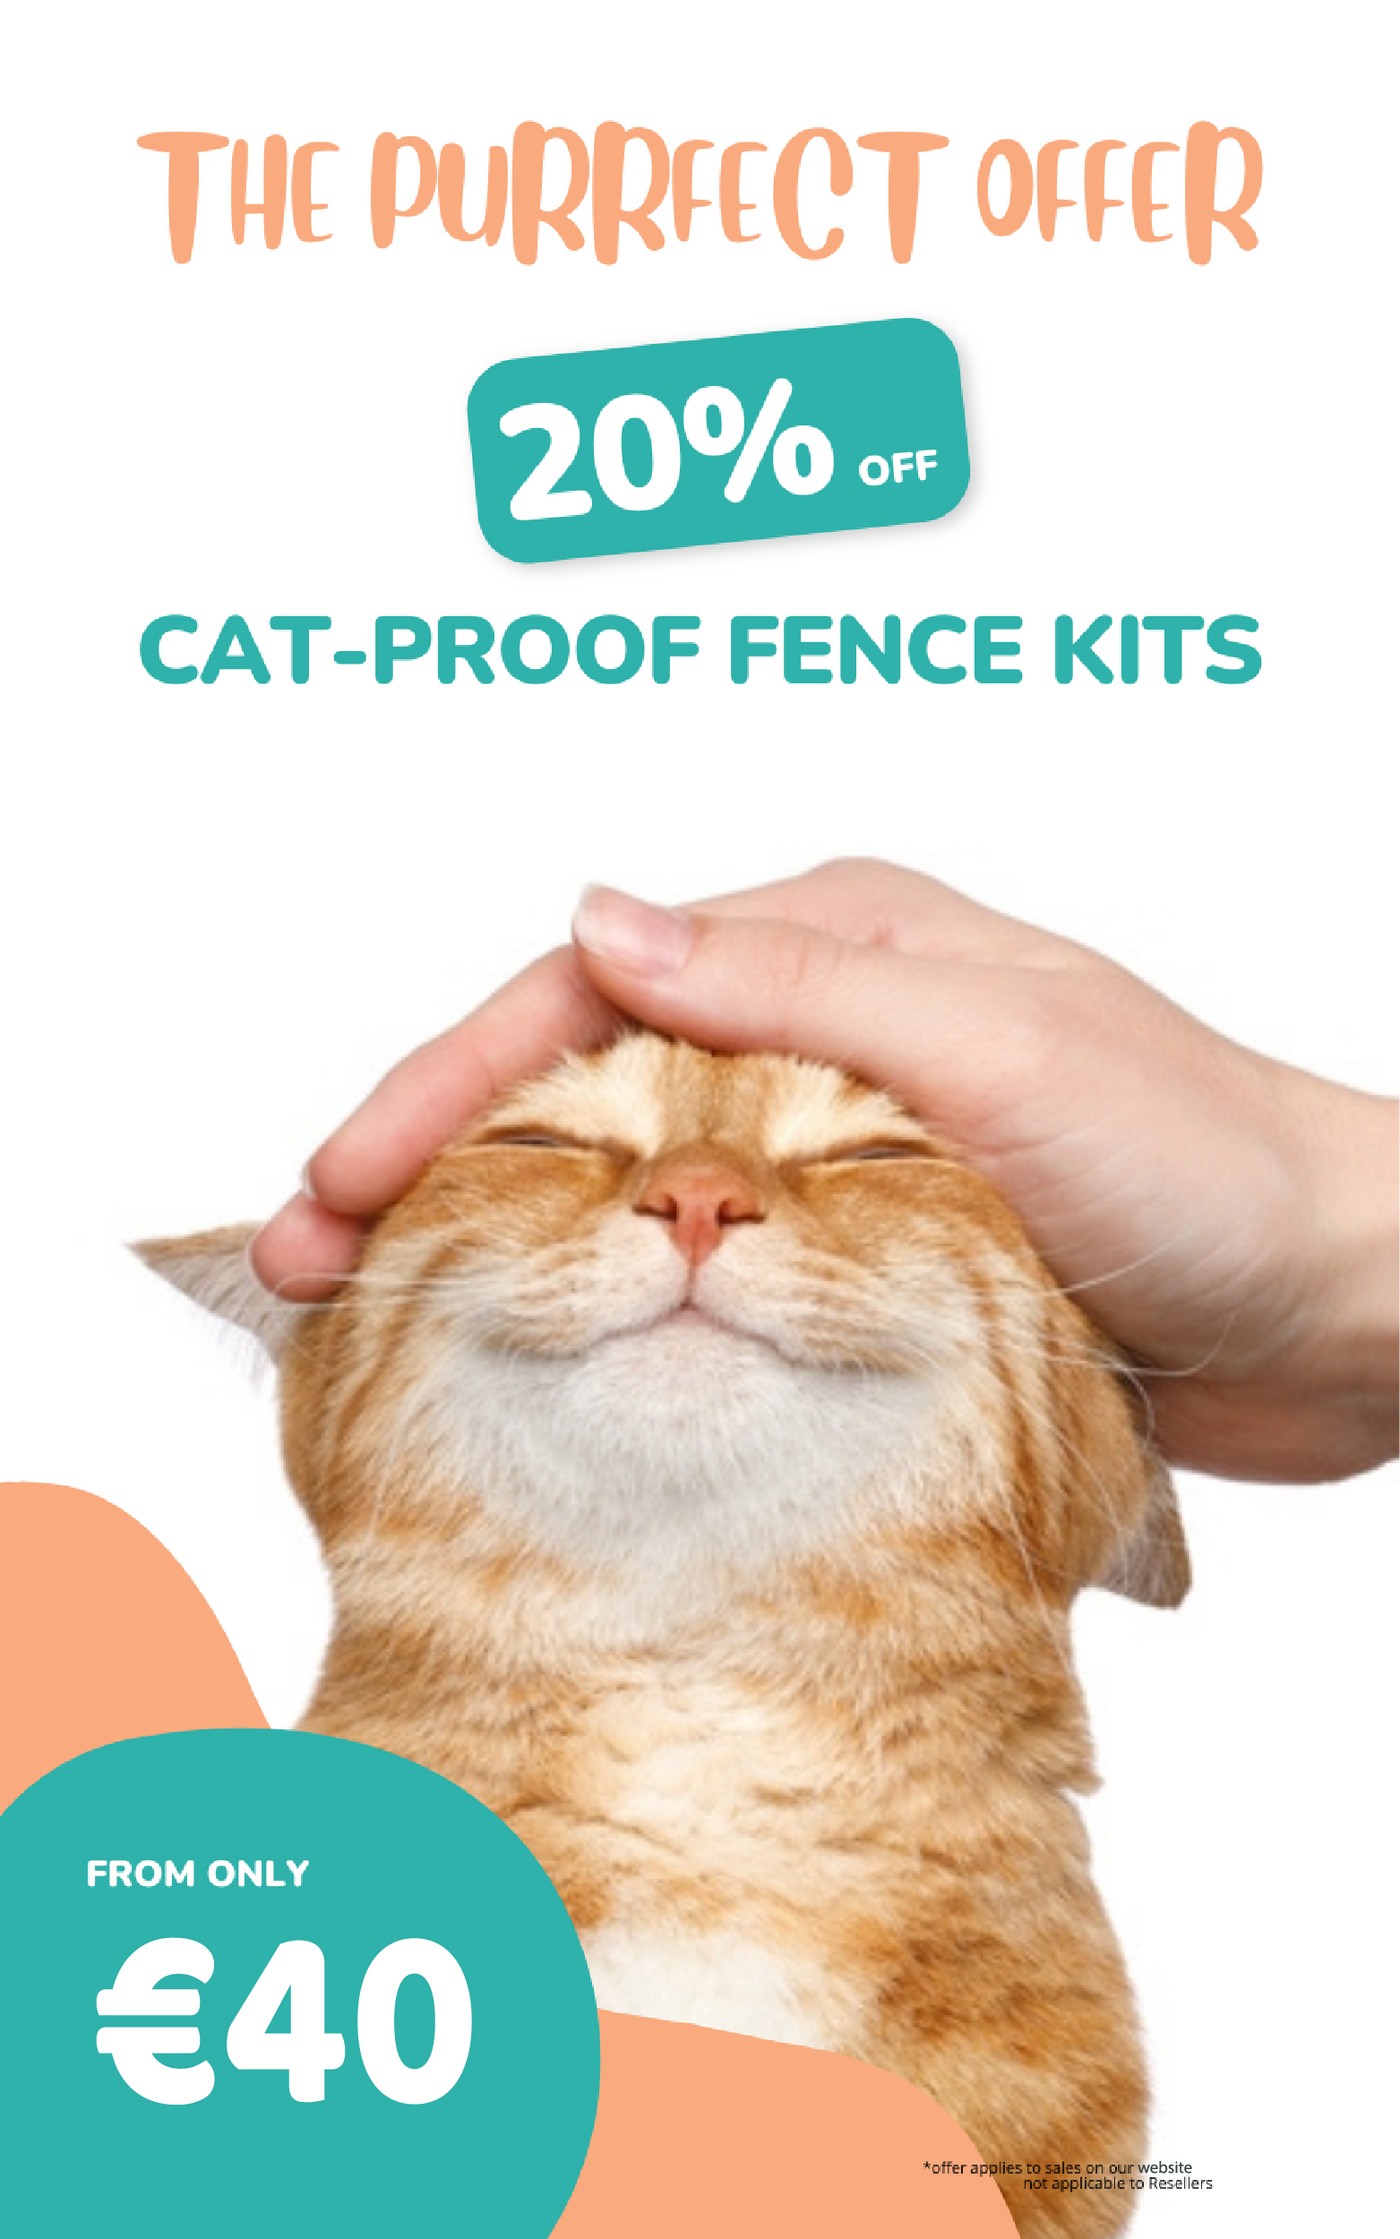 cat proof fence kits on sale - 20% off by Oscillot